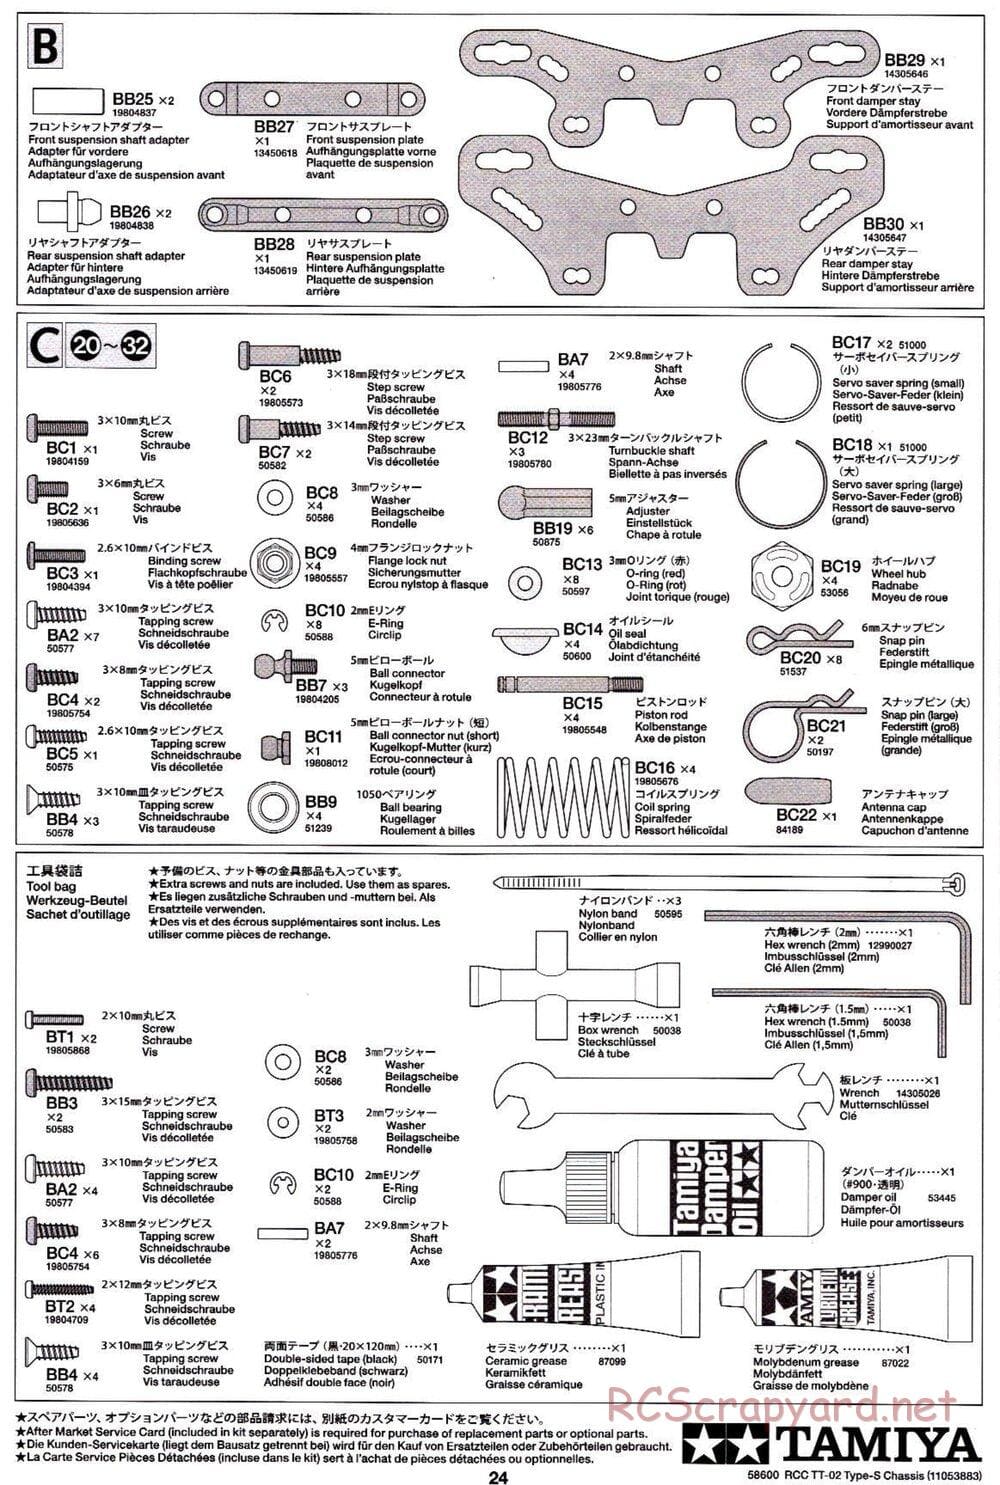 Tamiya - TT-02 Type-S Chassis - Manual - Page 24